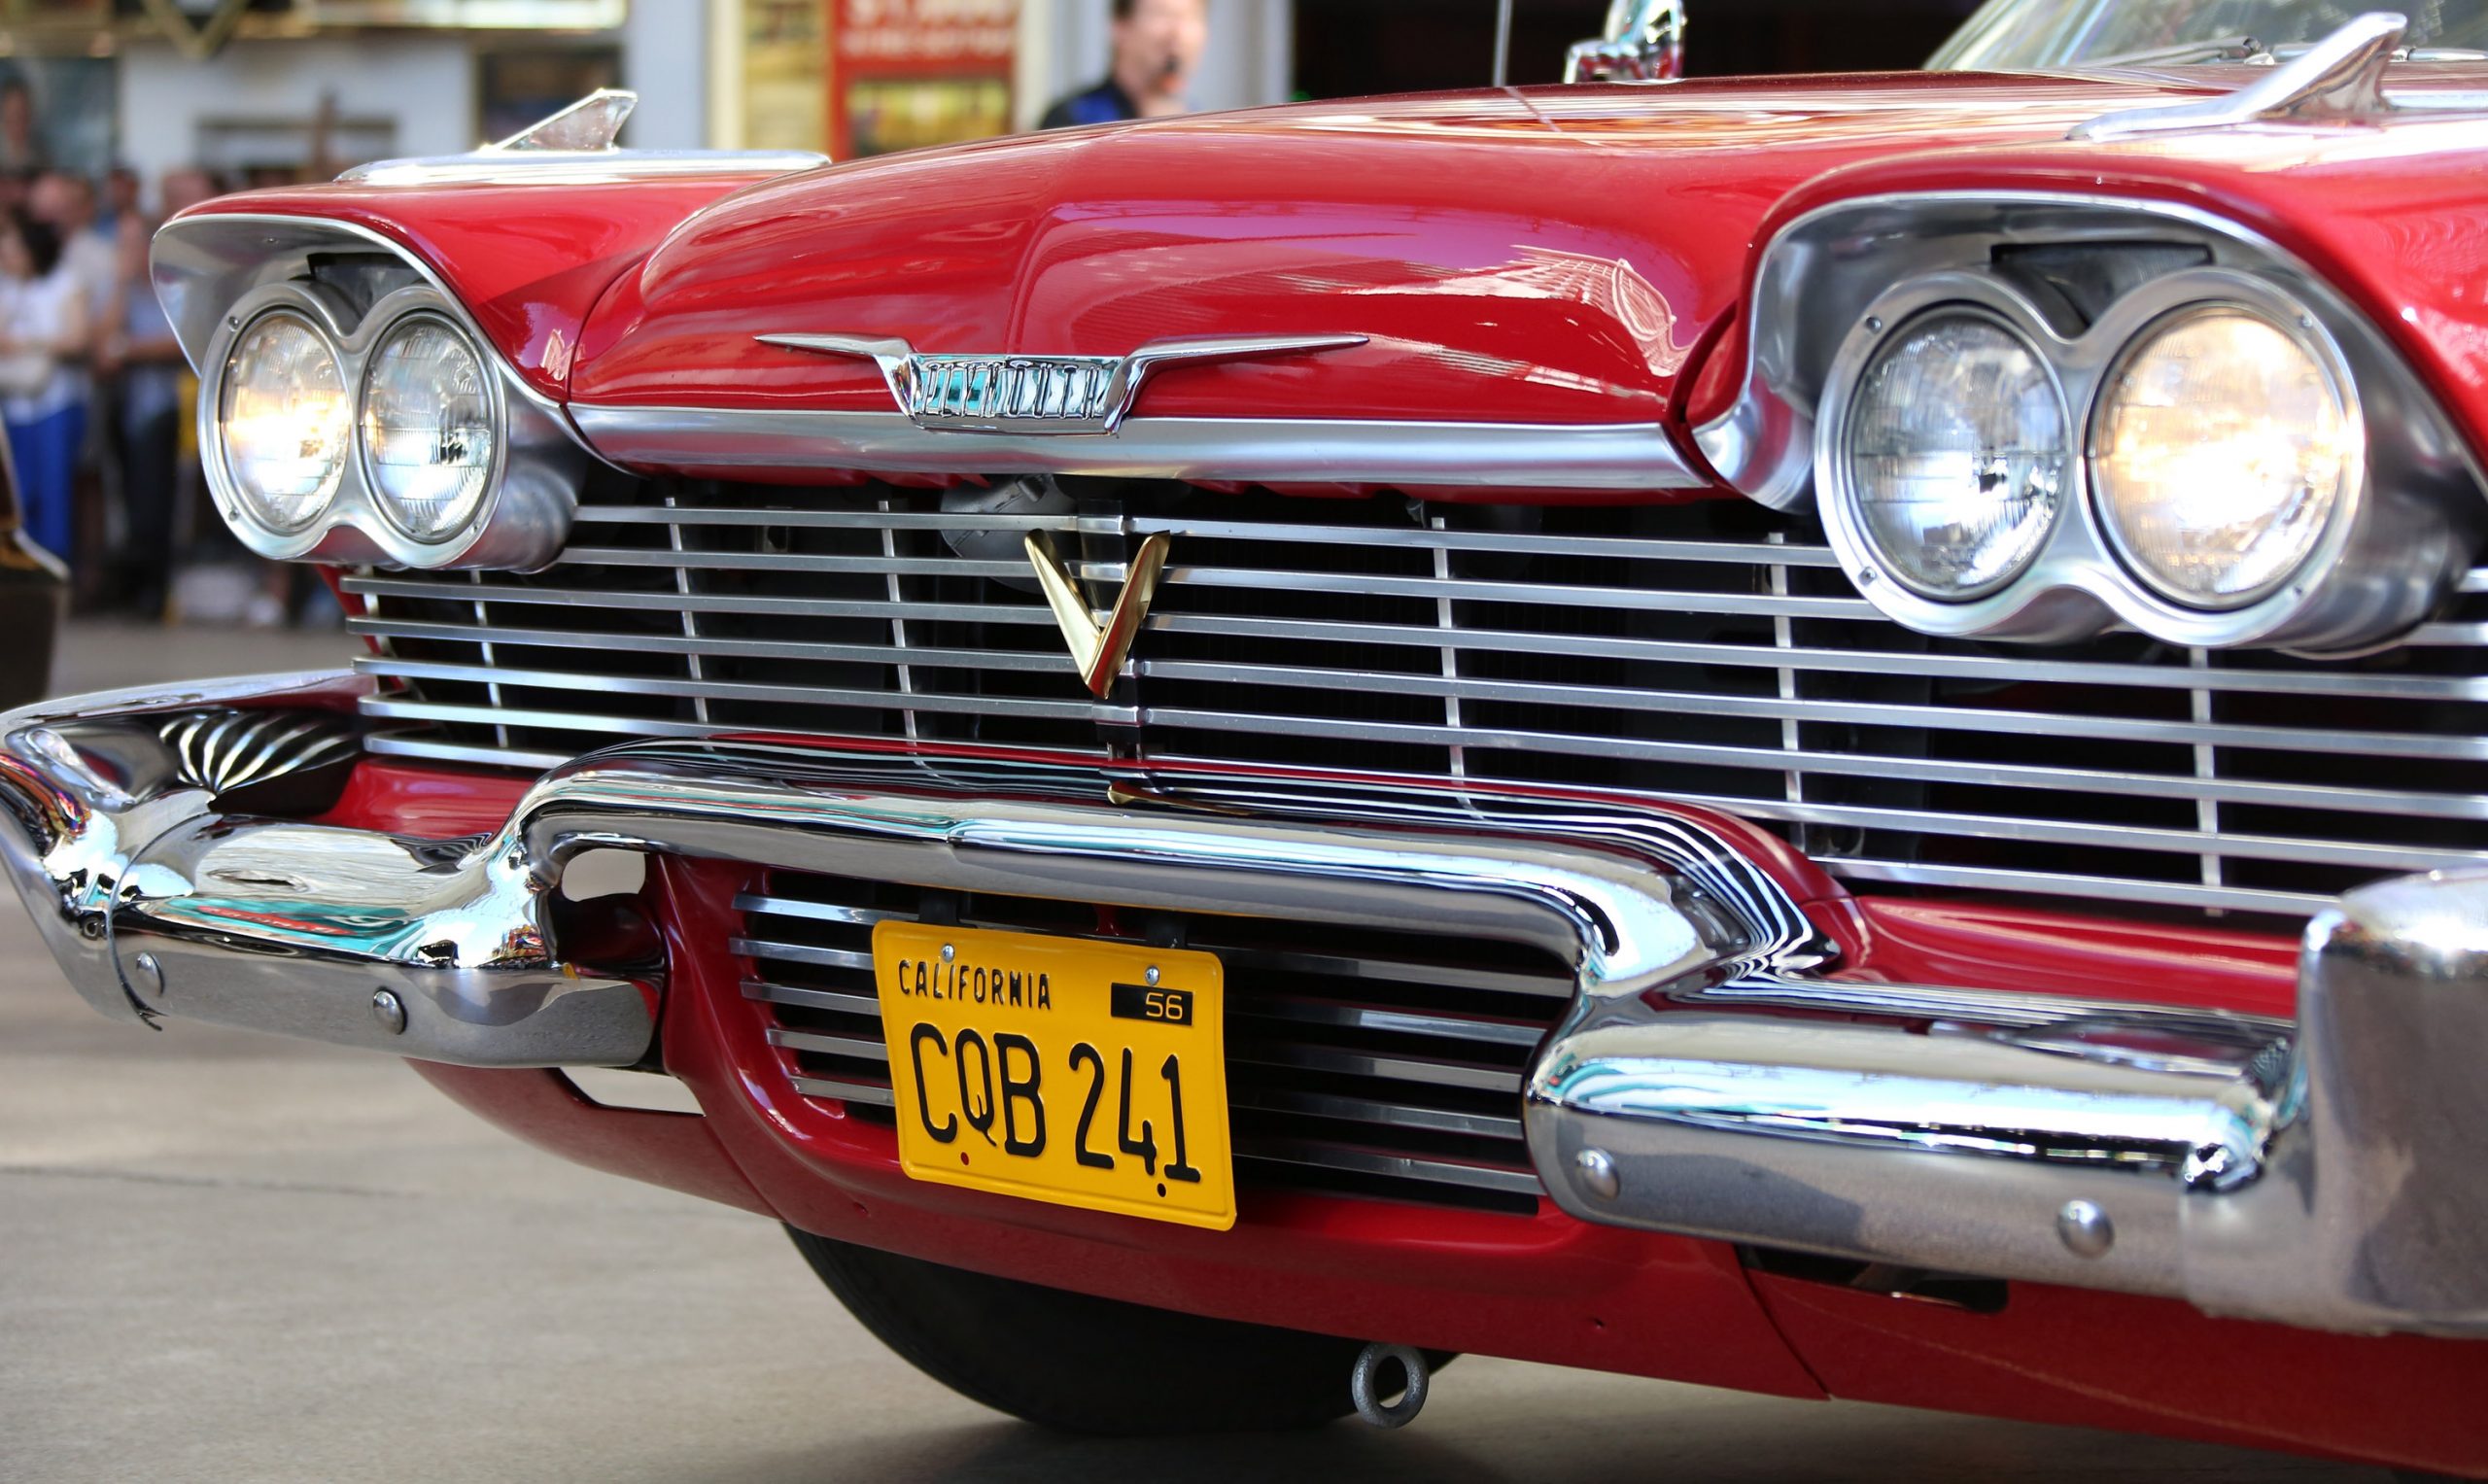 A red 1958 Plymouth Fury was used in the horror movie Christine.